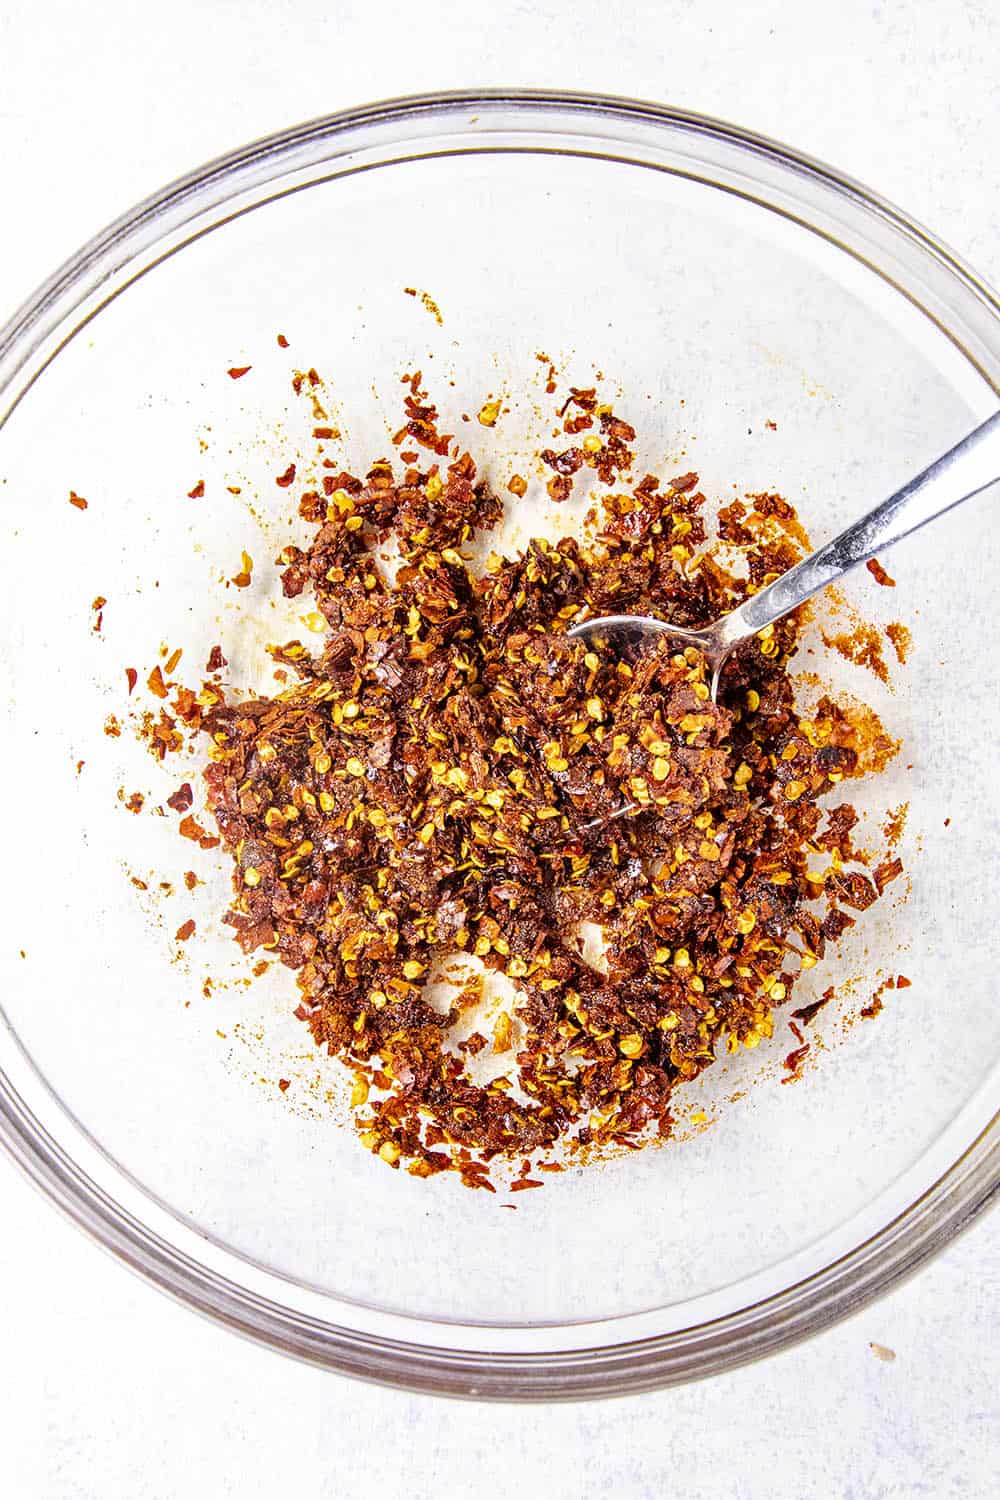 Mixing the chili flakes with wet ingredients